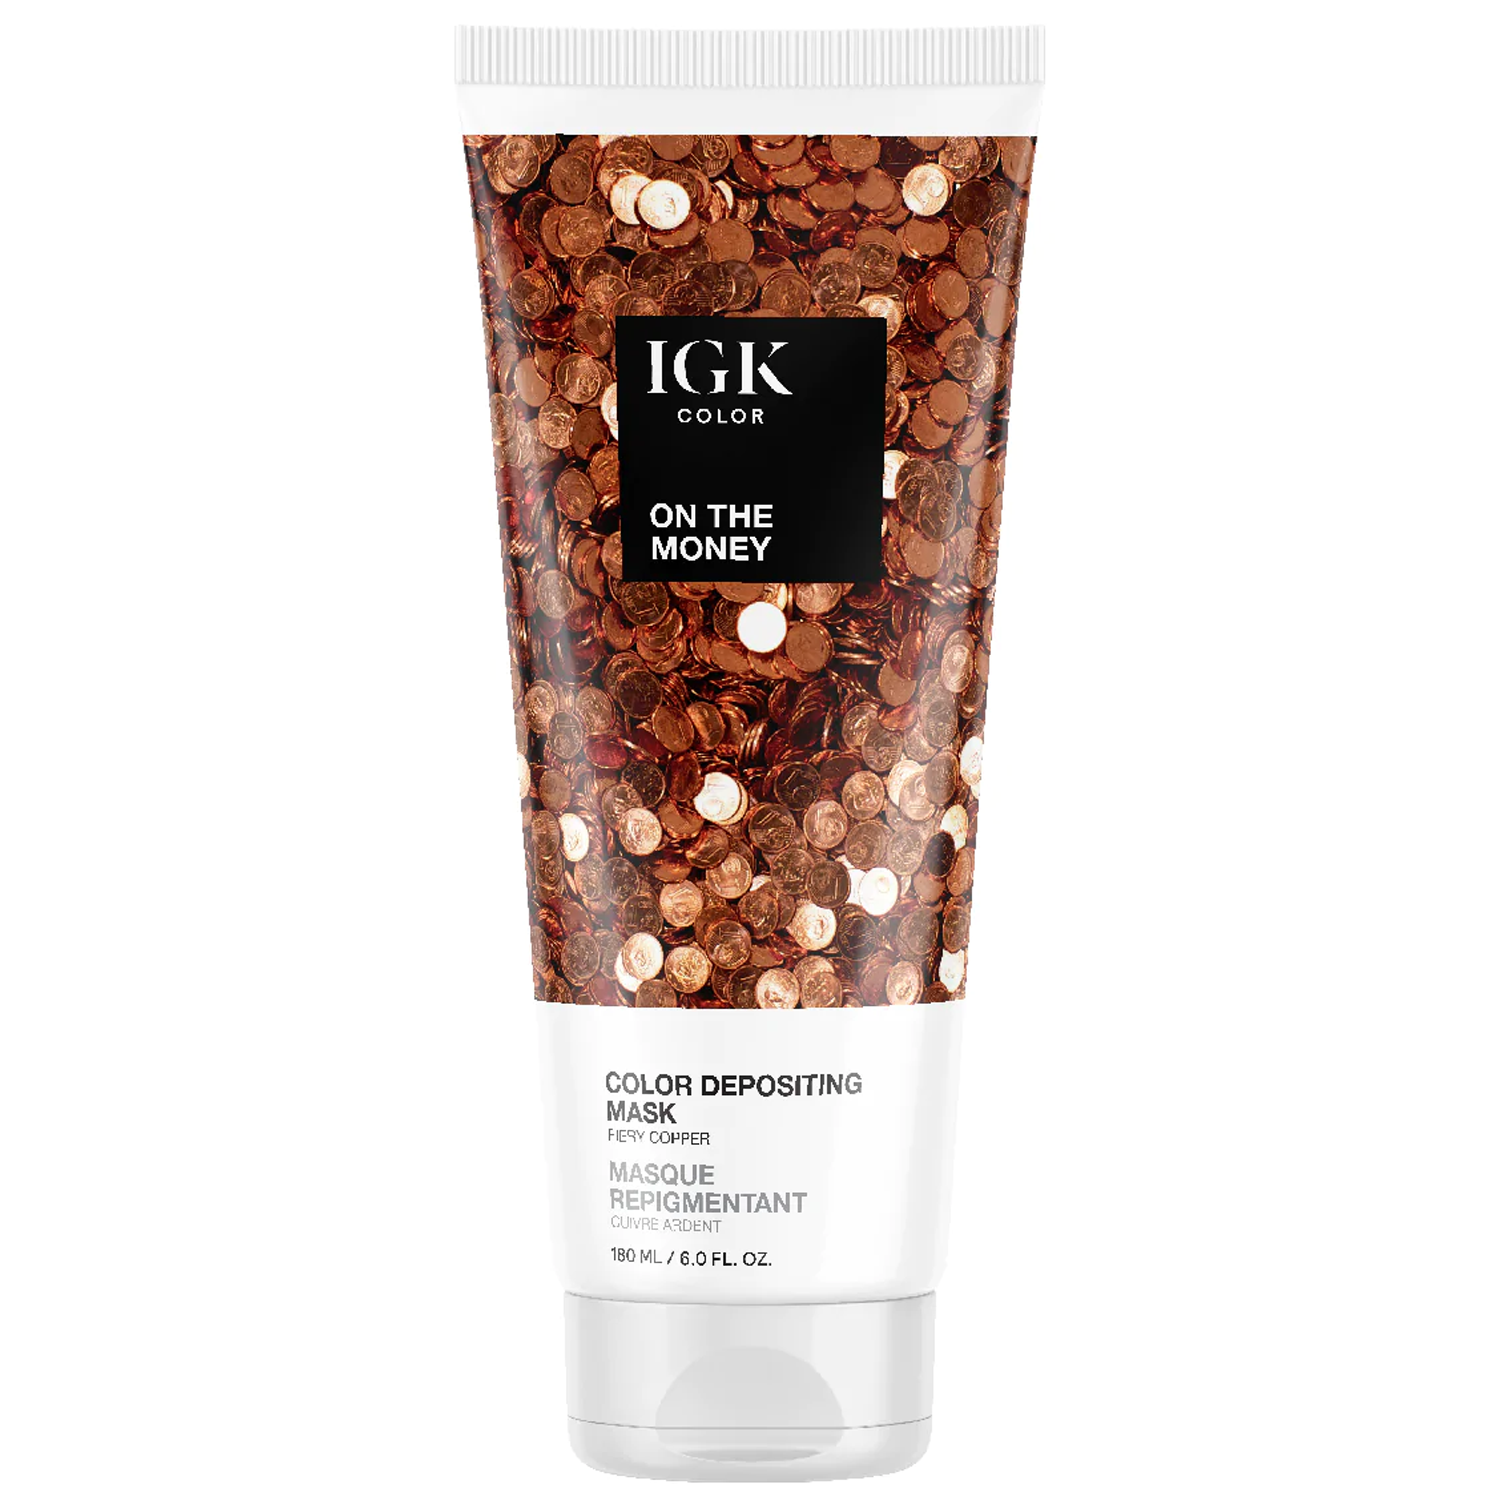 IGK Hair Color Depositing Mask, On the Money